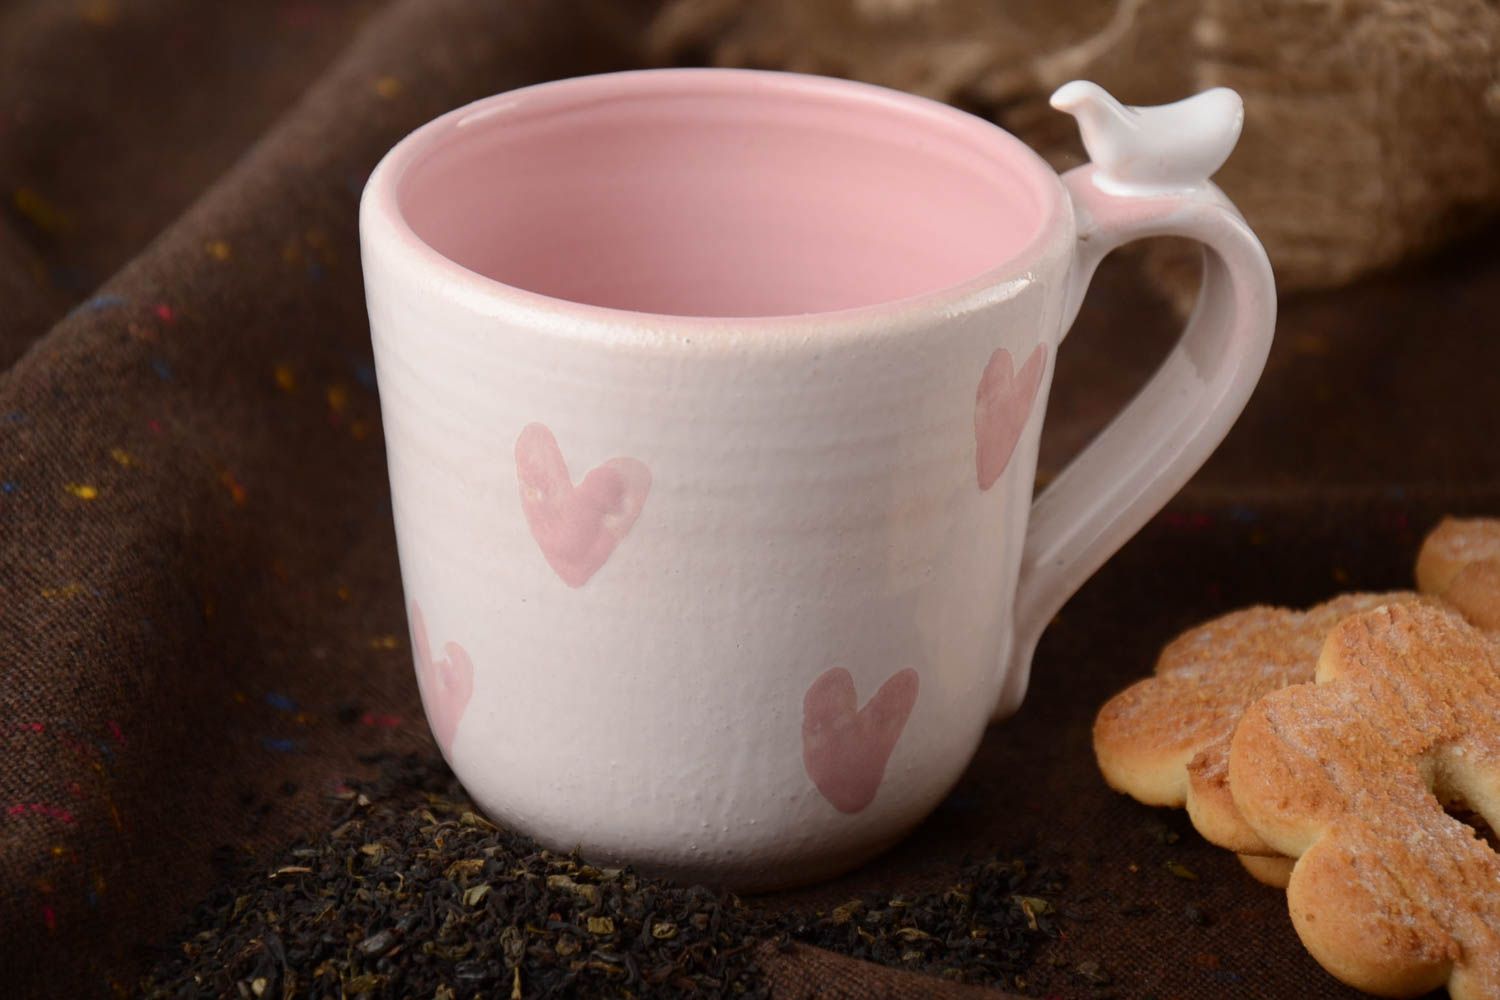 10 oz pink glaze ceramic cup with hearts pattern and bird on the handle photo 1